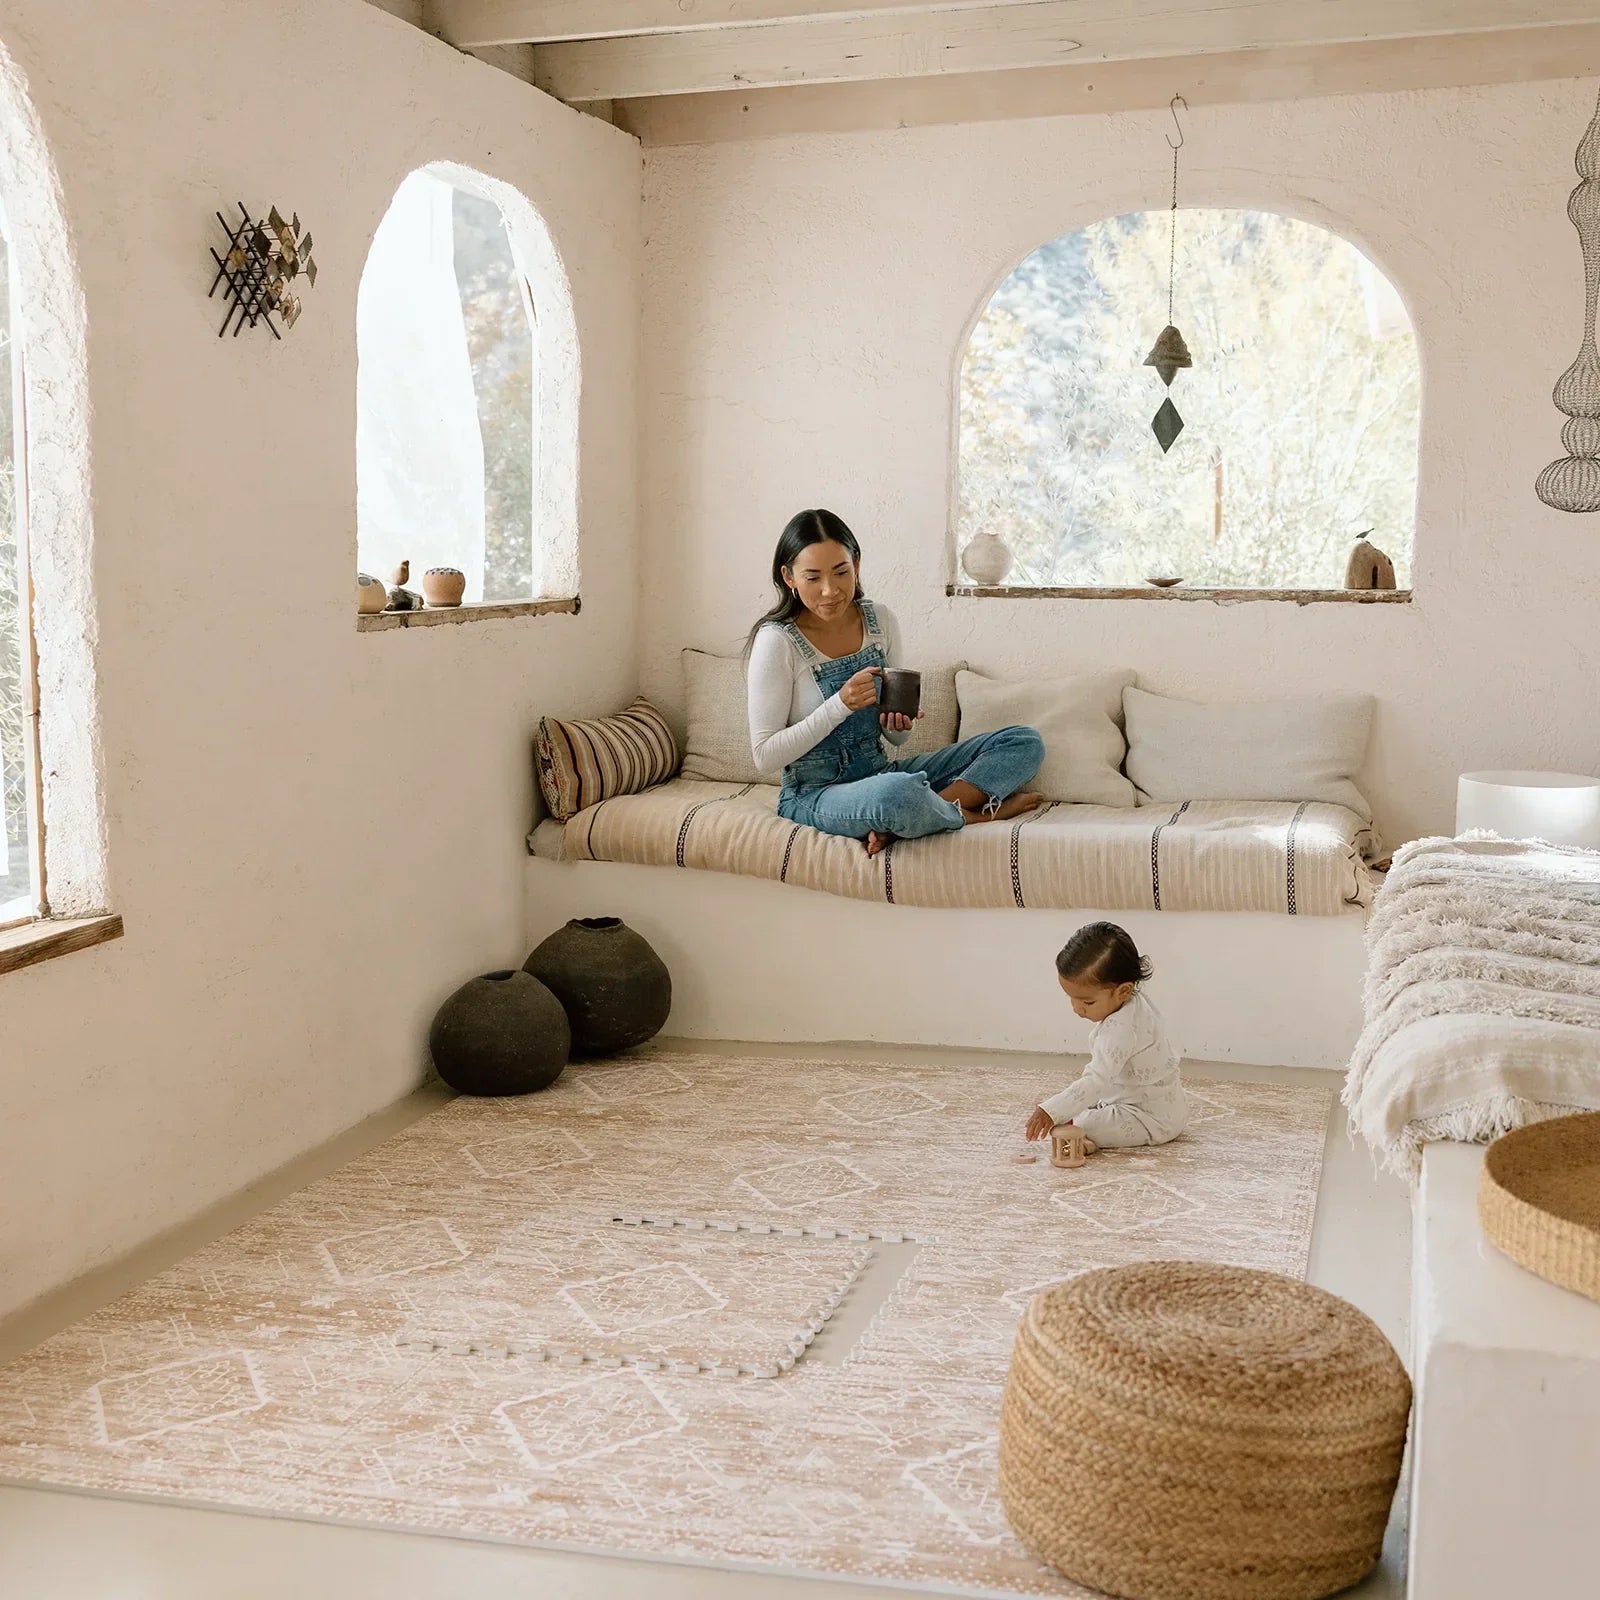 Ula Amber brown minimal boho pattern play mat shown in living room with one tile exposed and Mom watching baby play with wooden toys